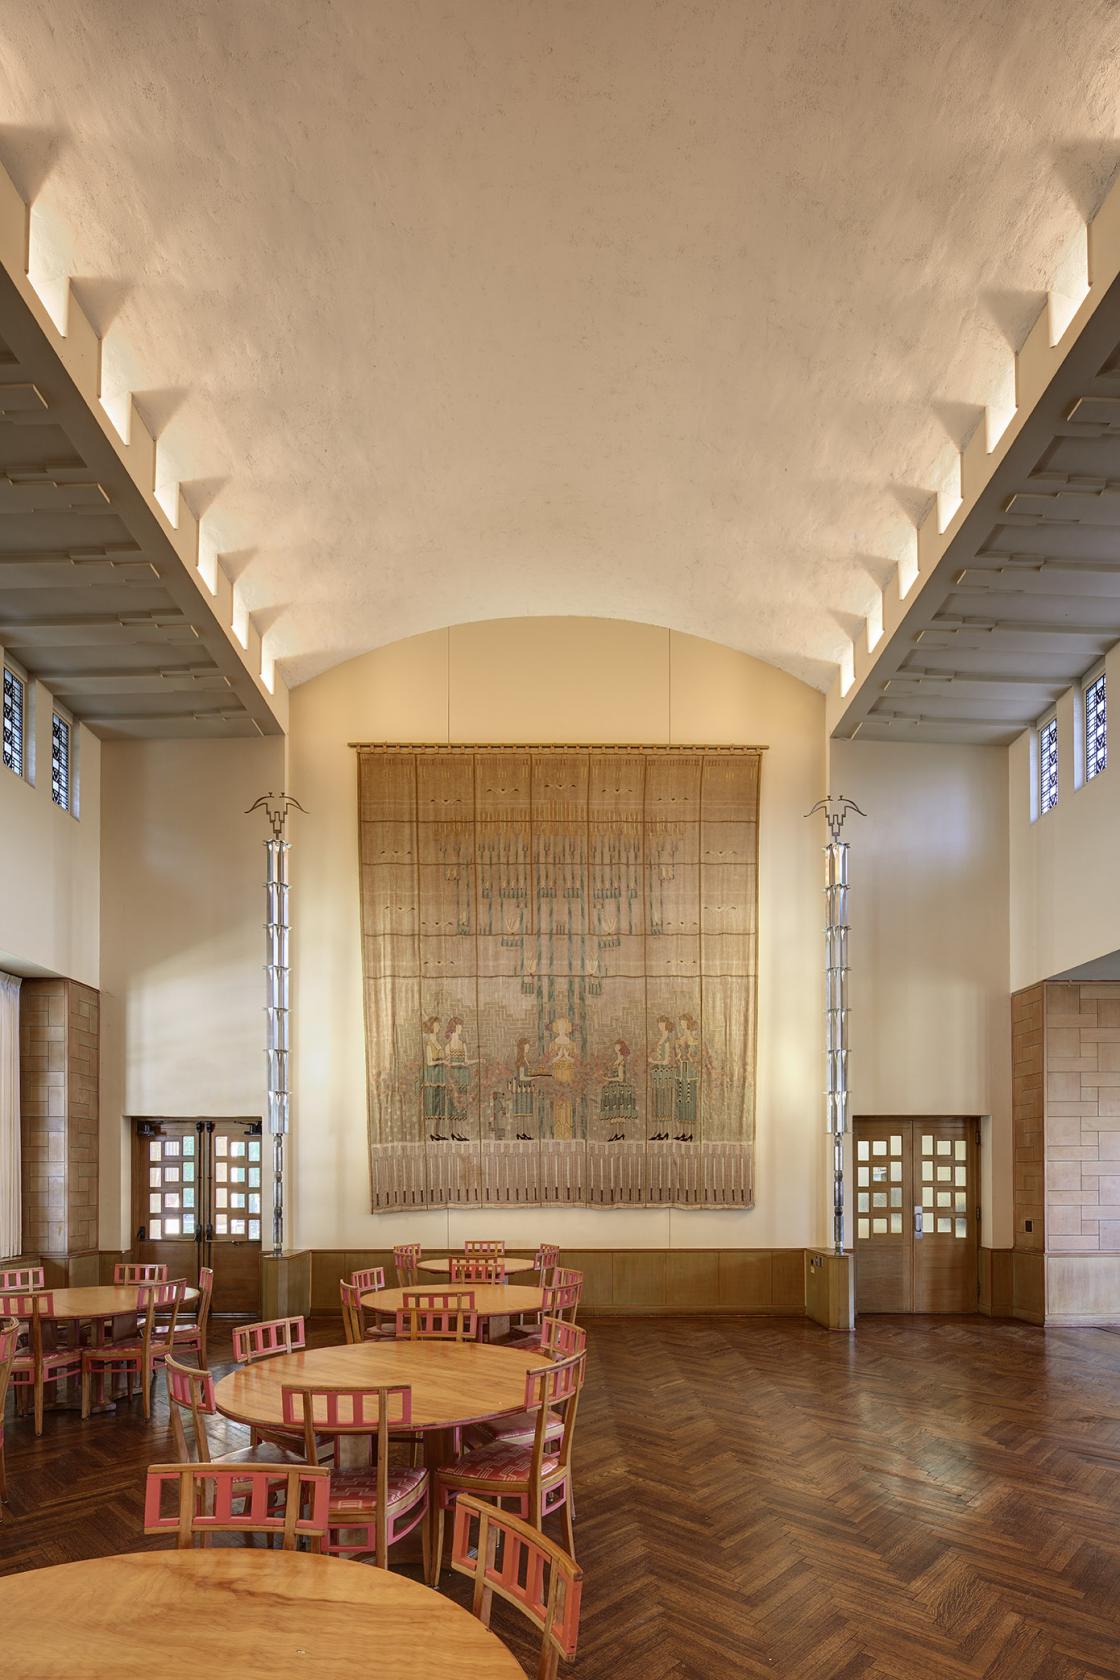 Kingswood School Dining Hall, 2015. James Haefner, photographer. Courtesy of Cranbrook Center for Collections and Research.